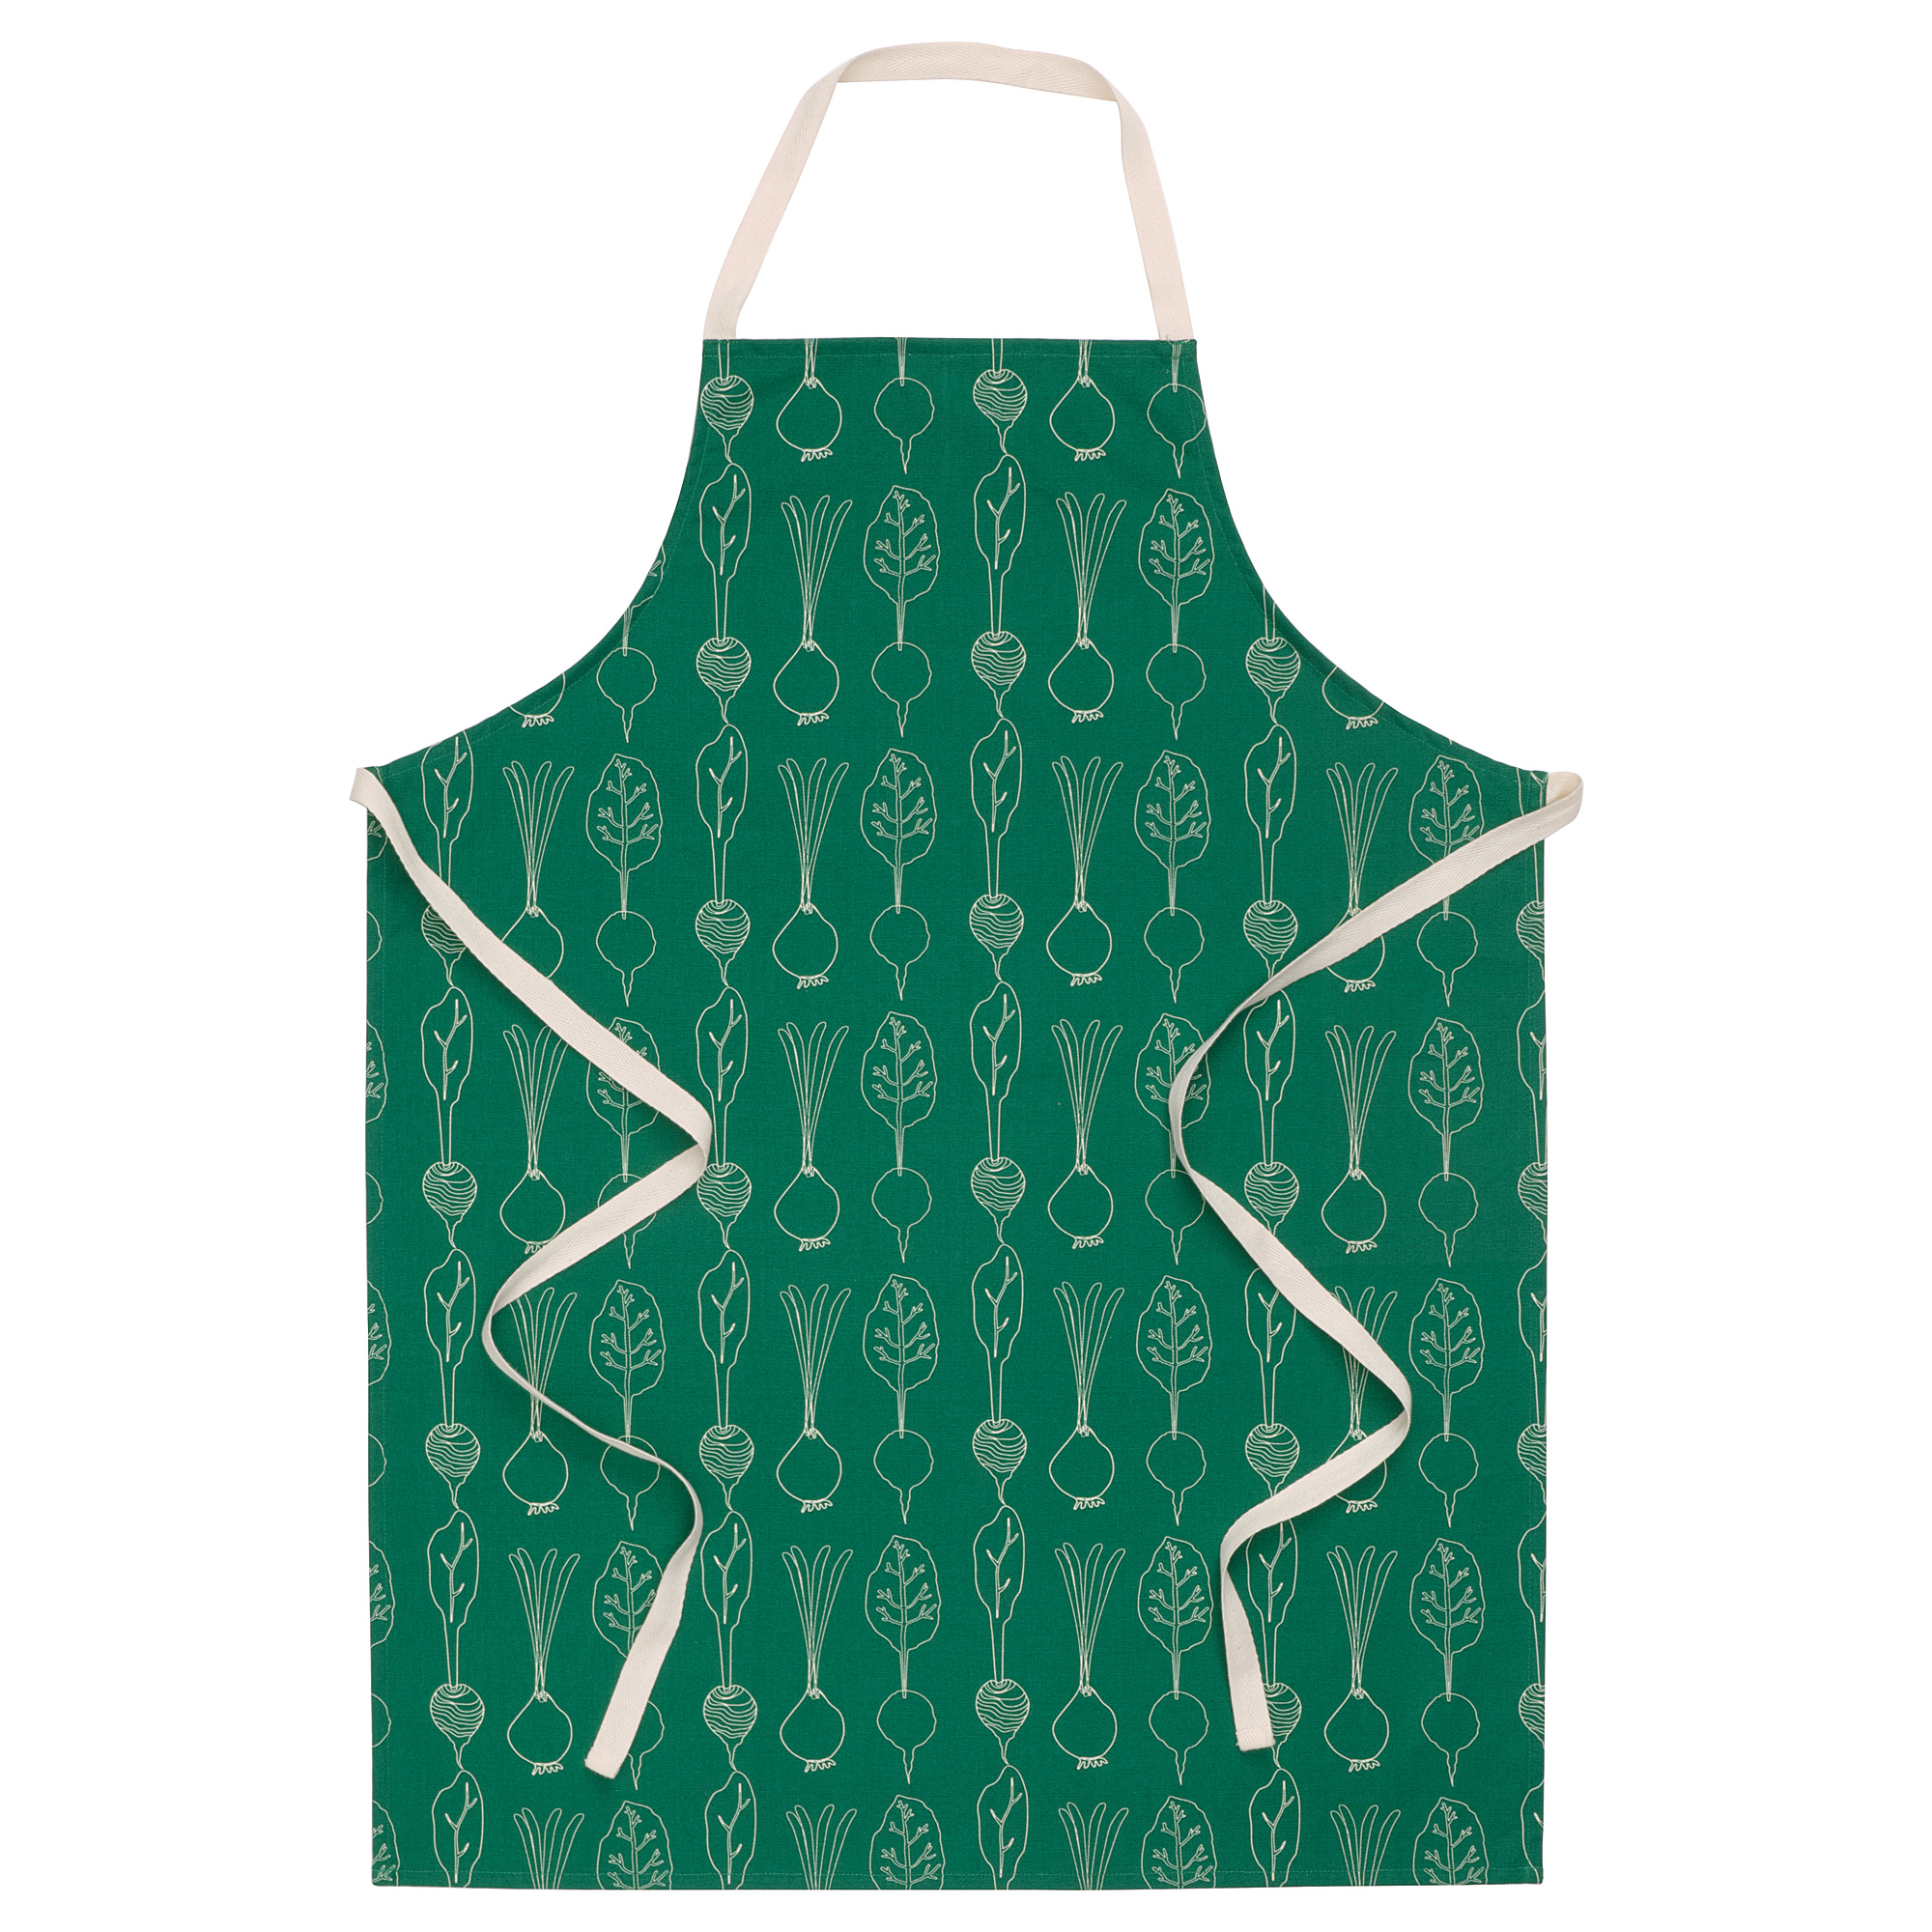 TORVFLY apron